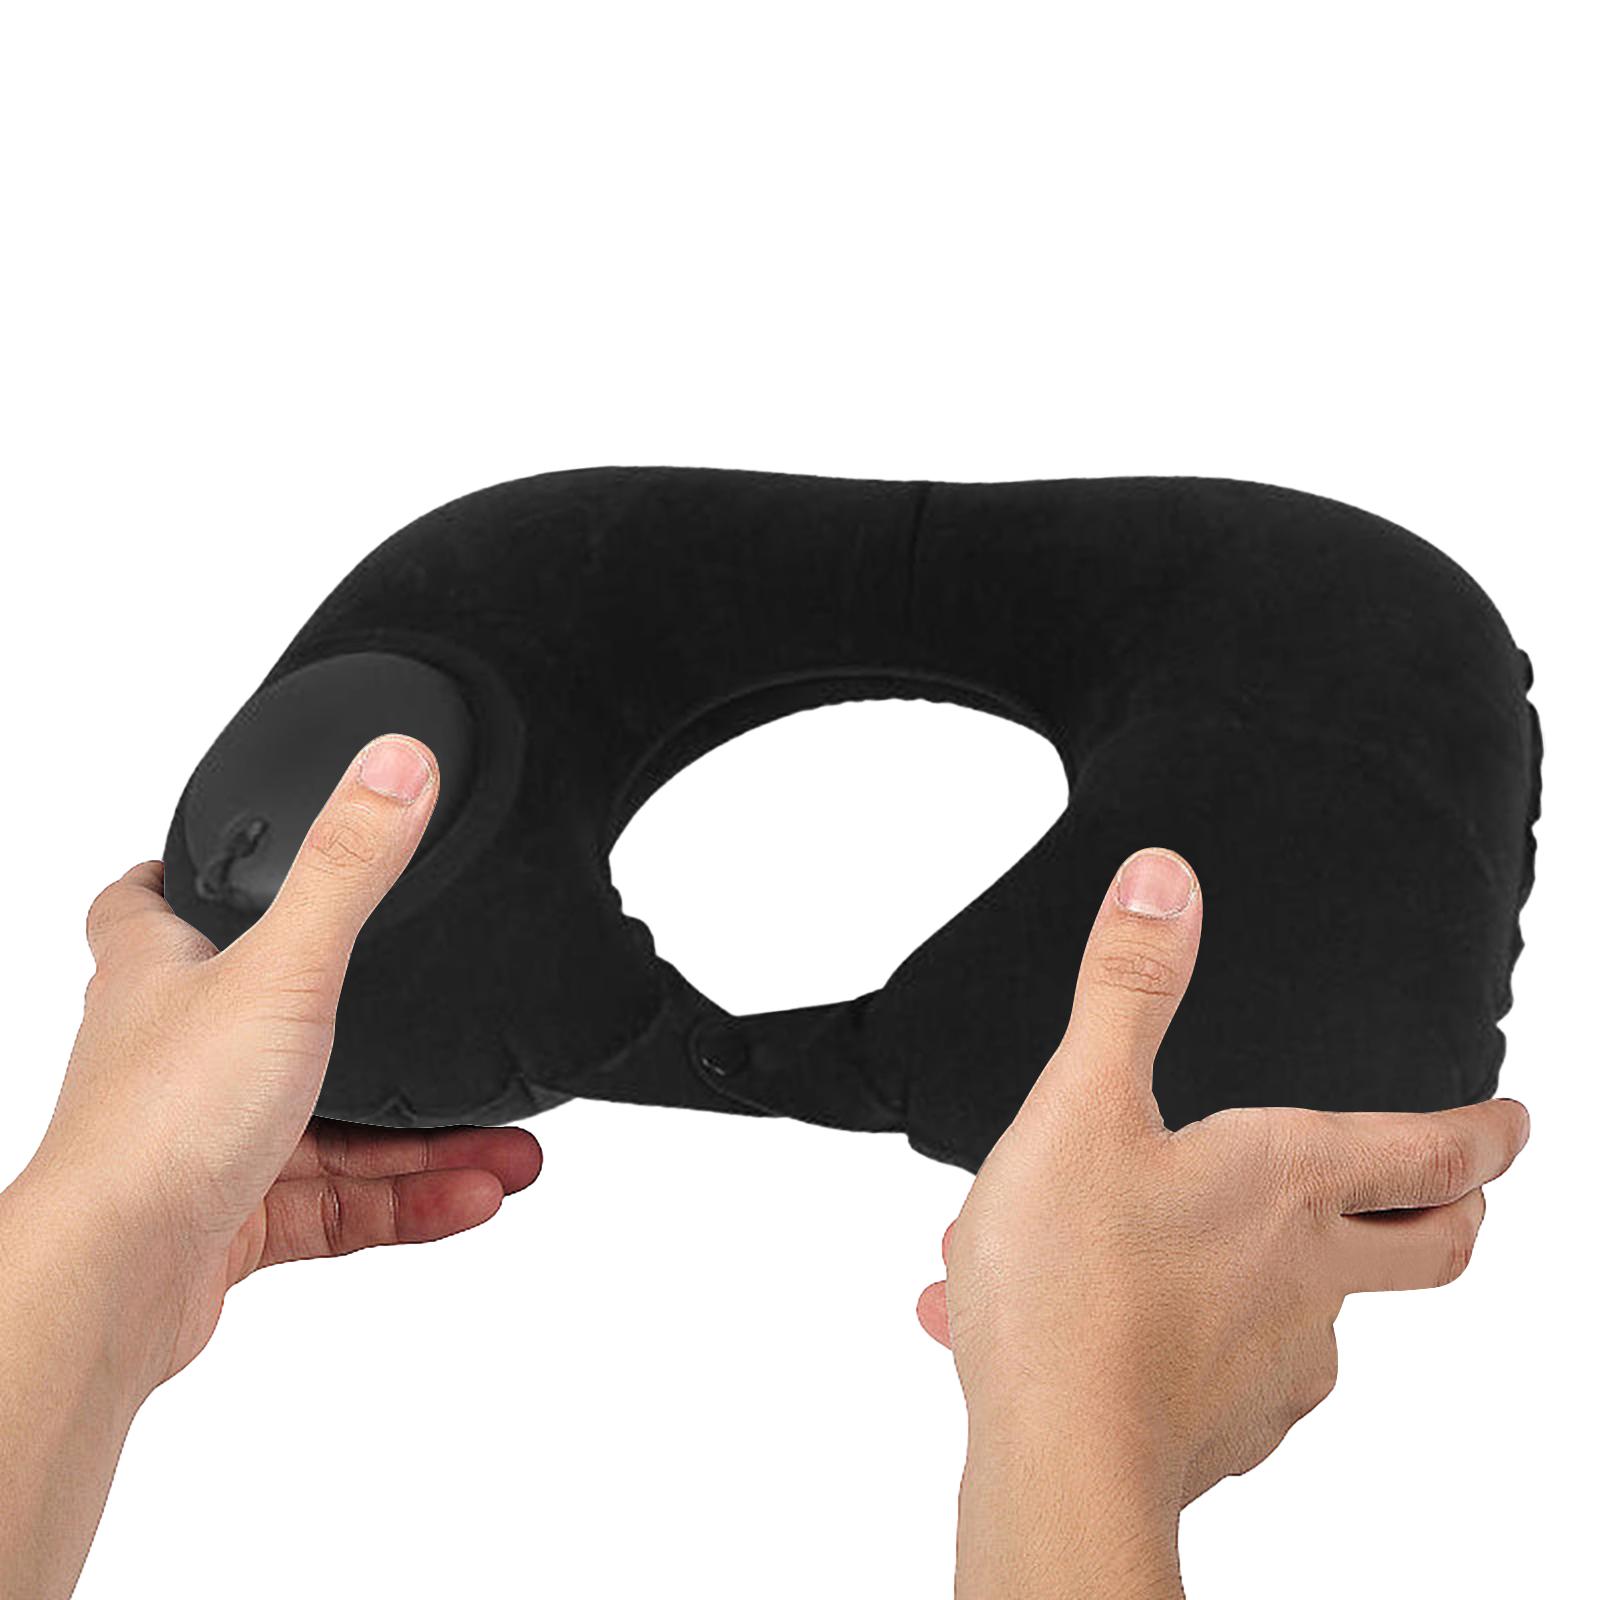 Travel Pillow Ergonomic Comfortable Foldable for Carry on Backpacking Office black U shape